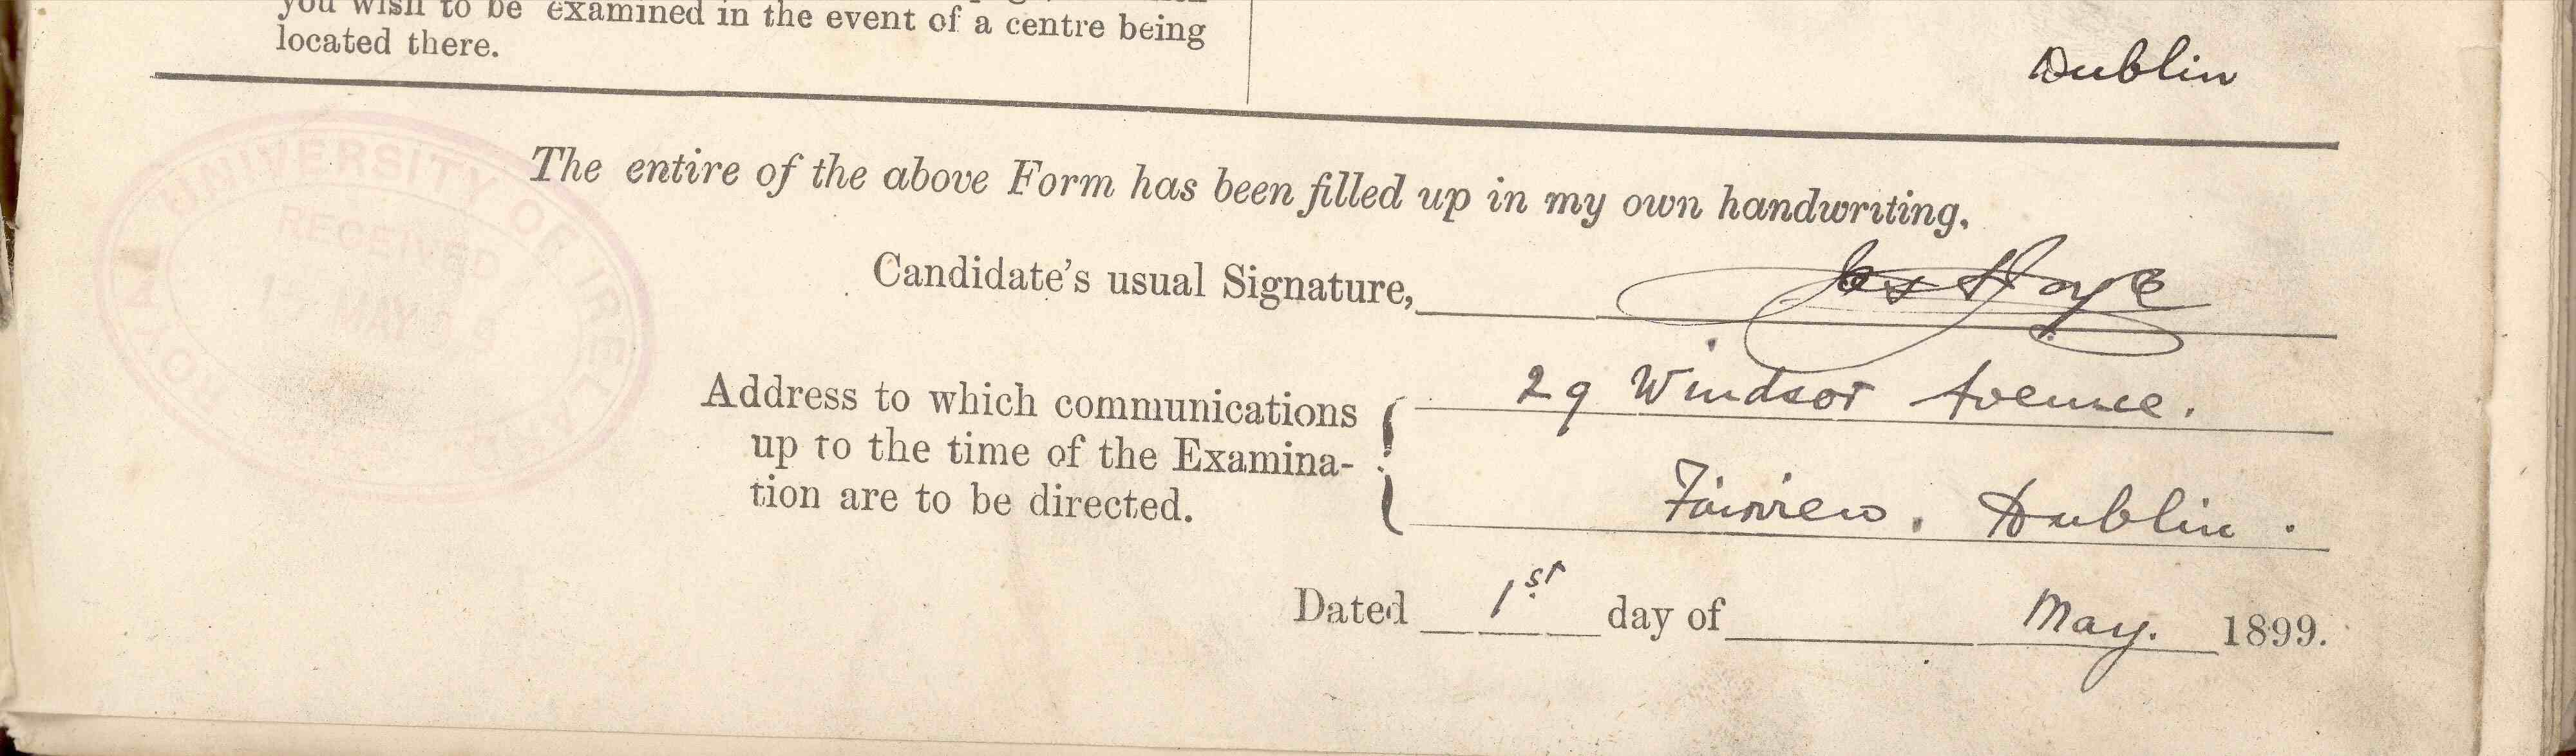 Signature of James Joyce on his Matriculation Application Form 